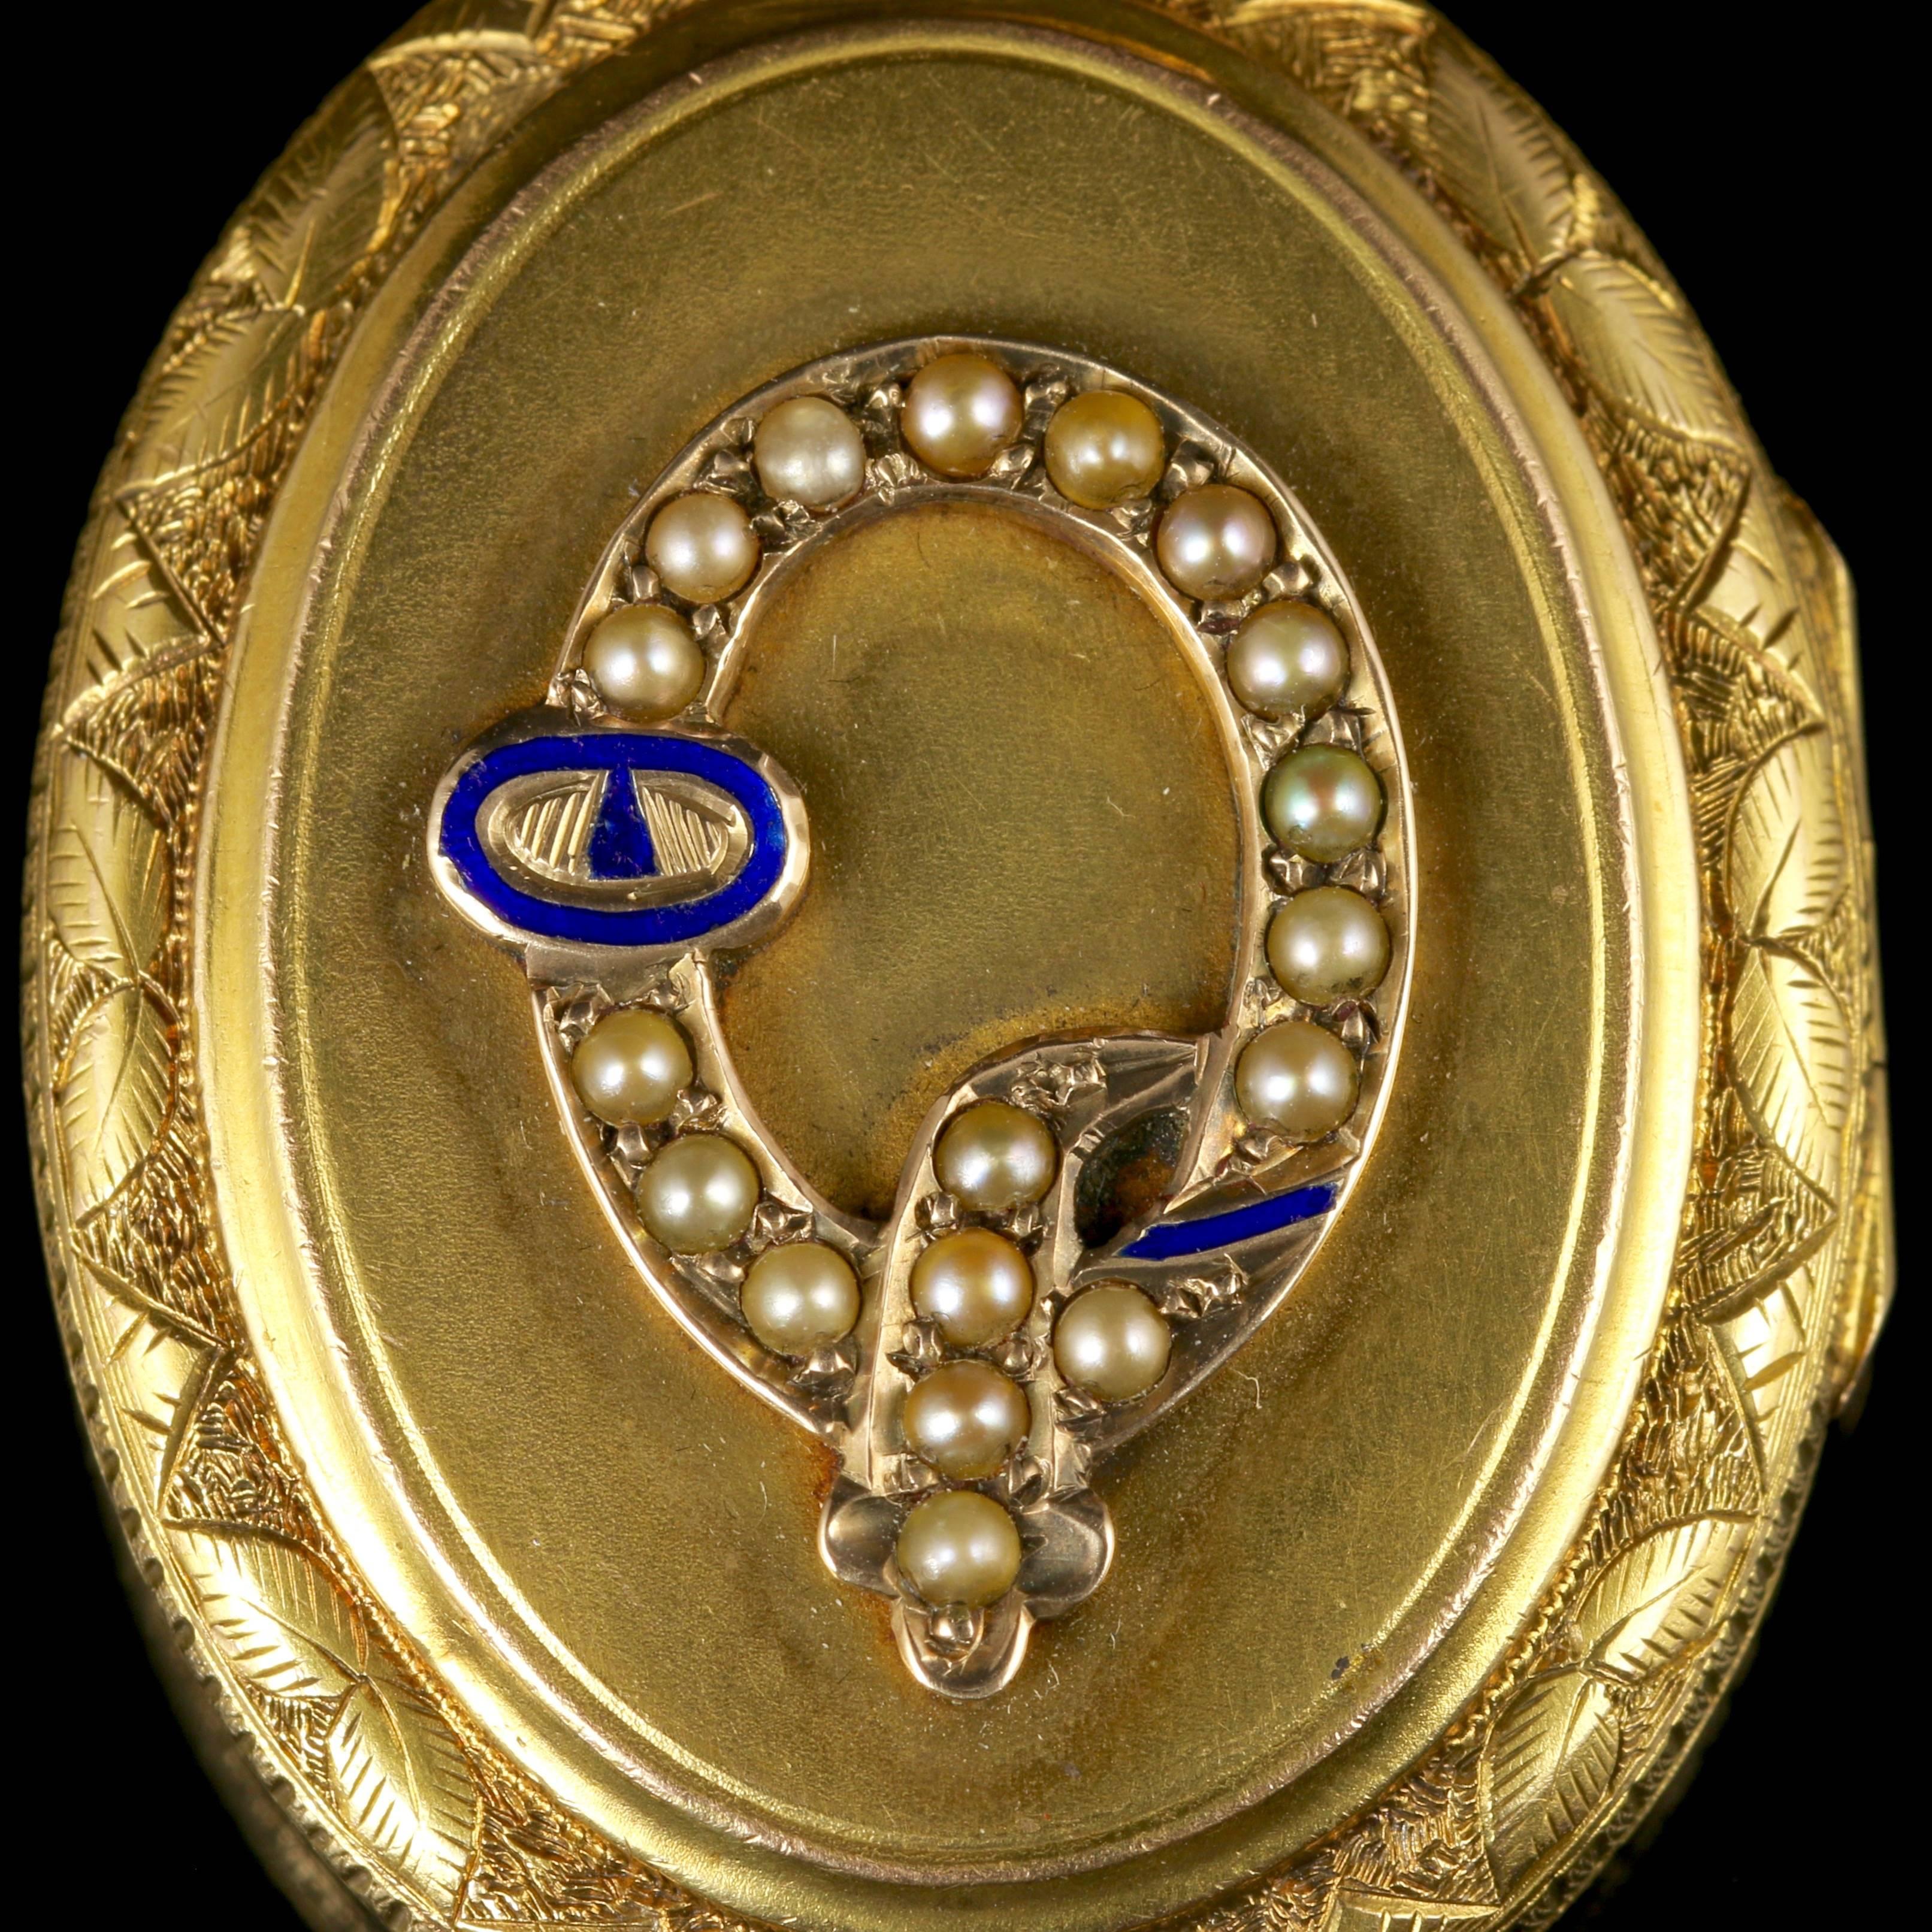 Antique Victorian Gold Locket Large Pearl and Enamel Buckle 15 Carat Gold 1